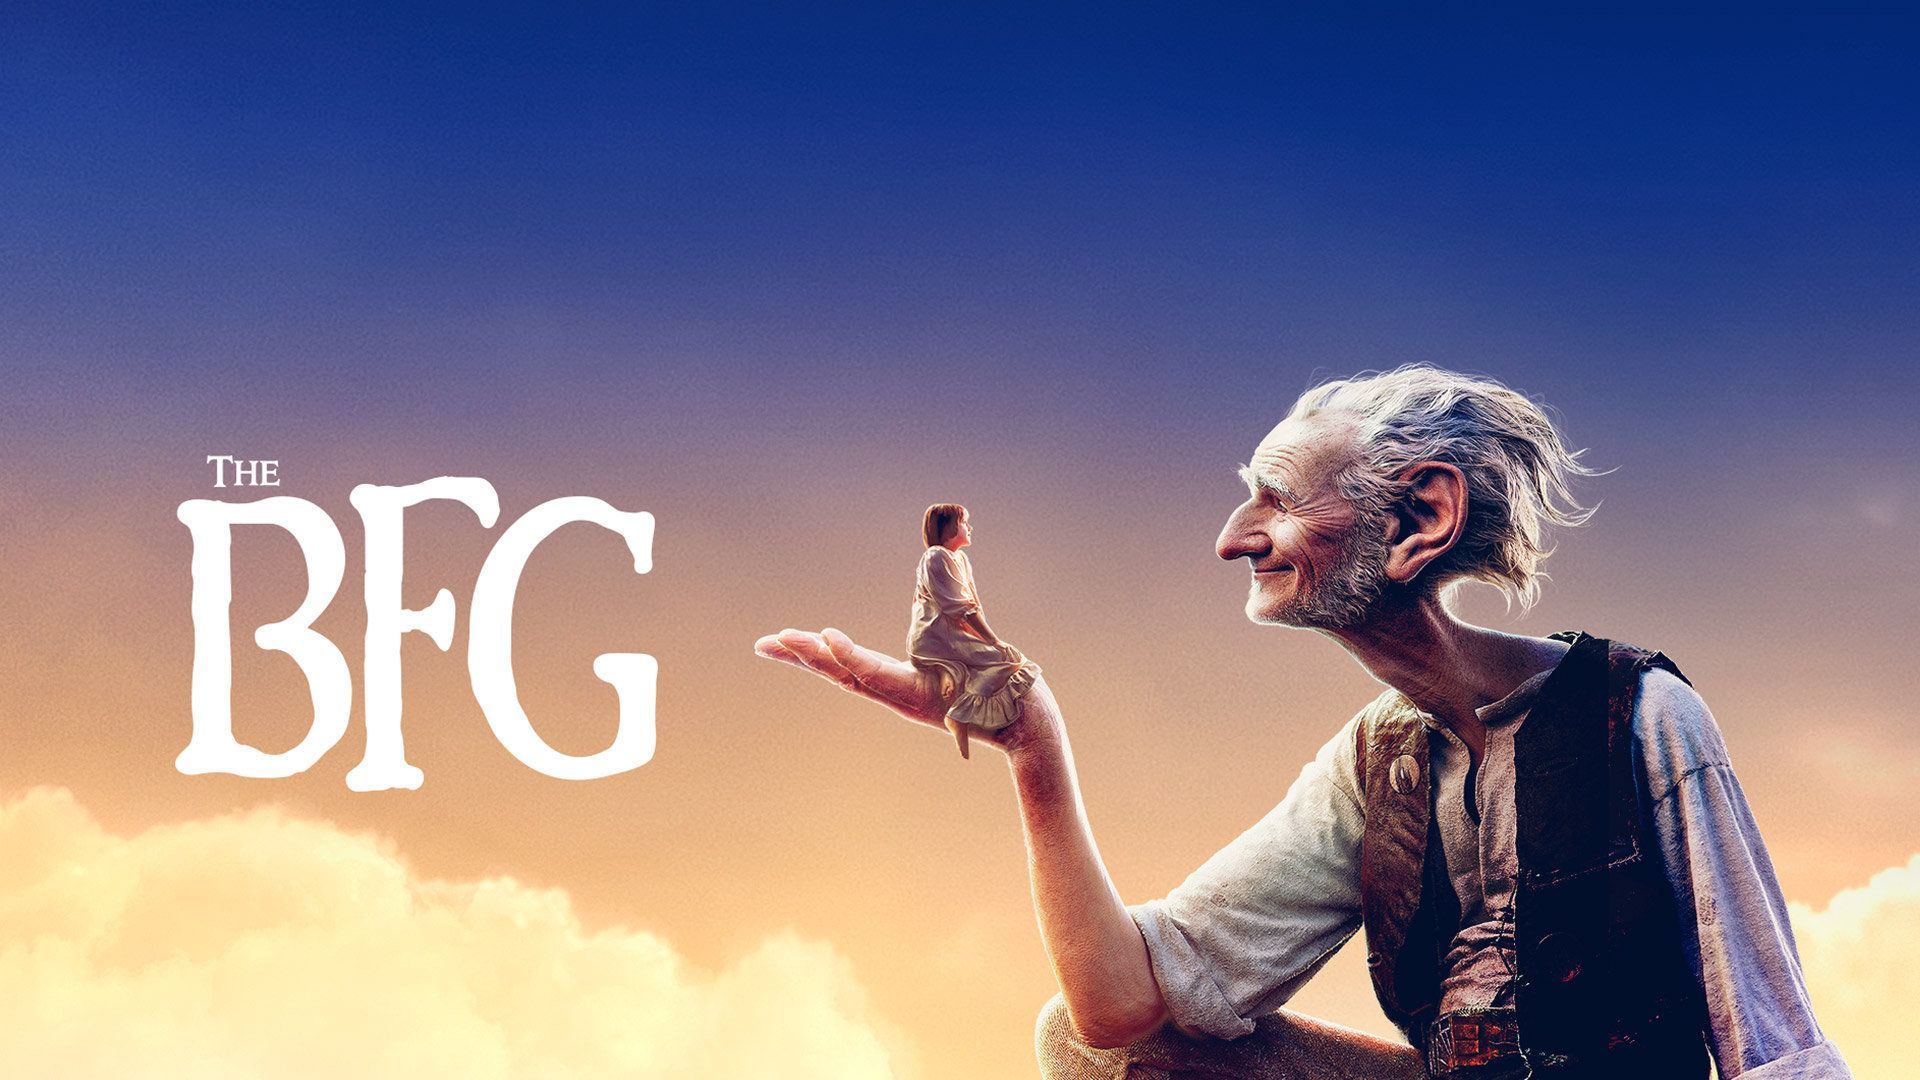 The Bfg (2016) Wallpapers